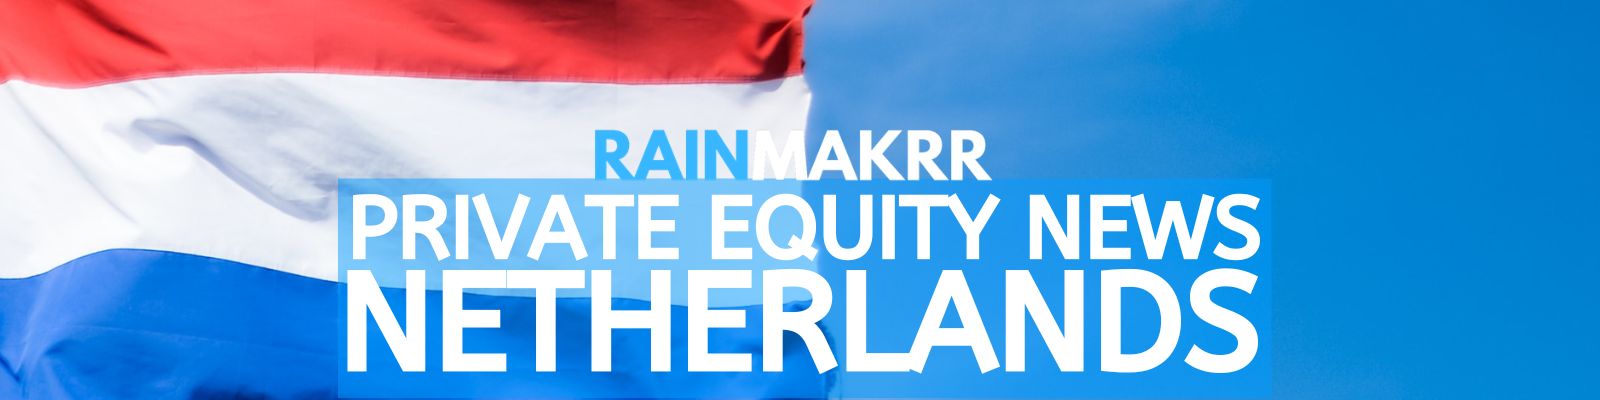 Latest Private Equity News Holland Recent Private Equity News Netherlands